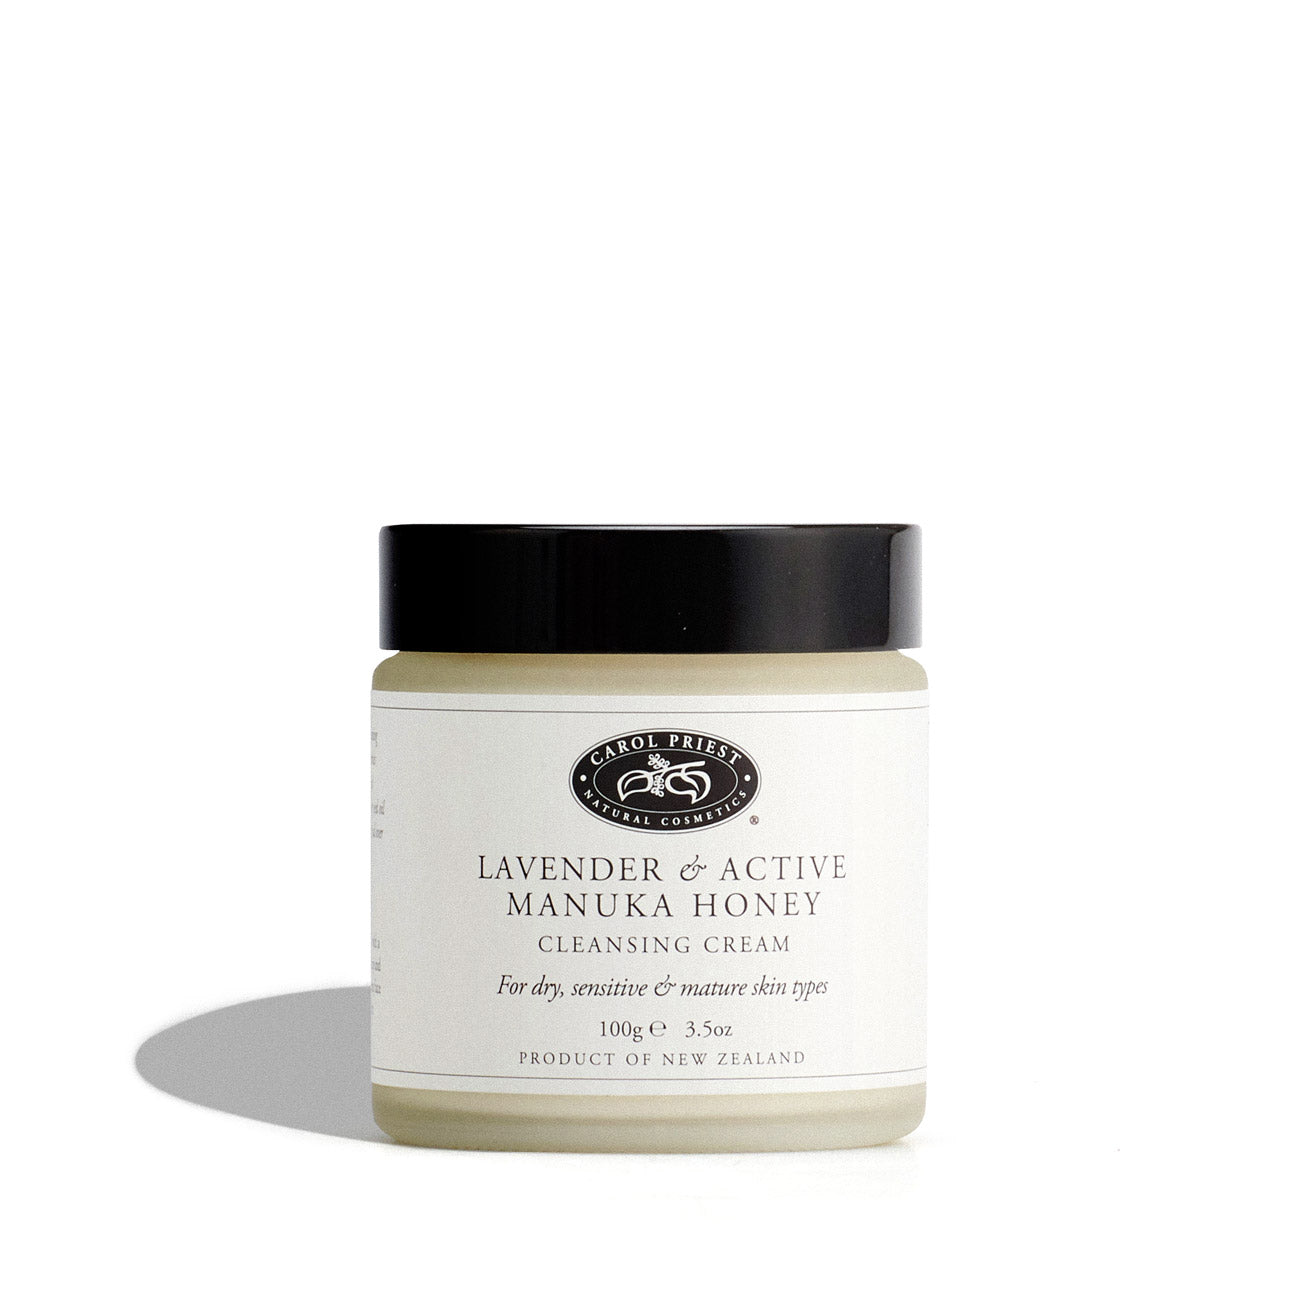 photo of Lavender &amp; Manuka Honey Cleansing Cream, a gentle, hydrating cleanser from Carol Priest&#39;s natural, organic cosmetics line.